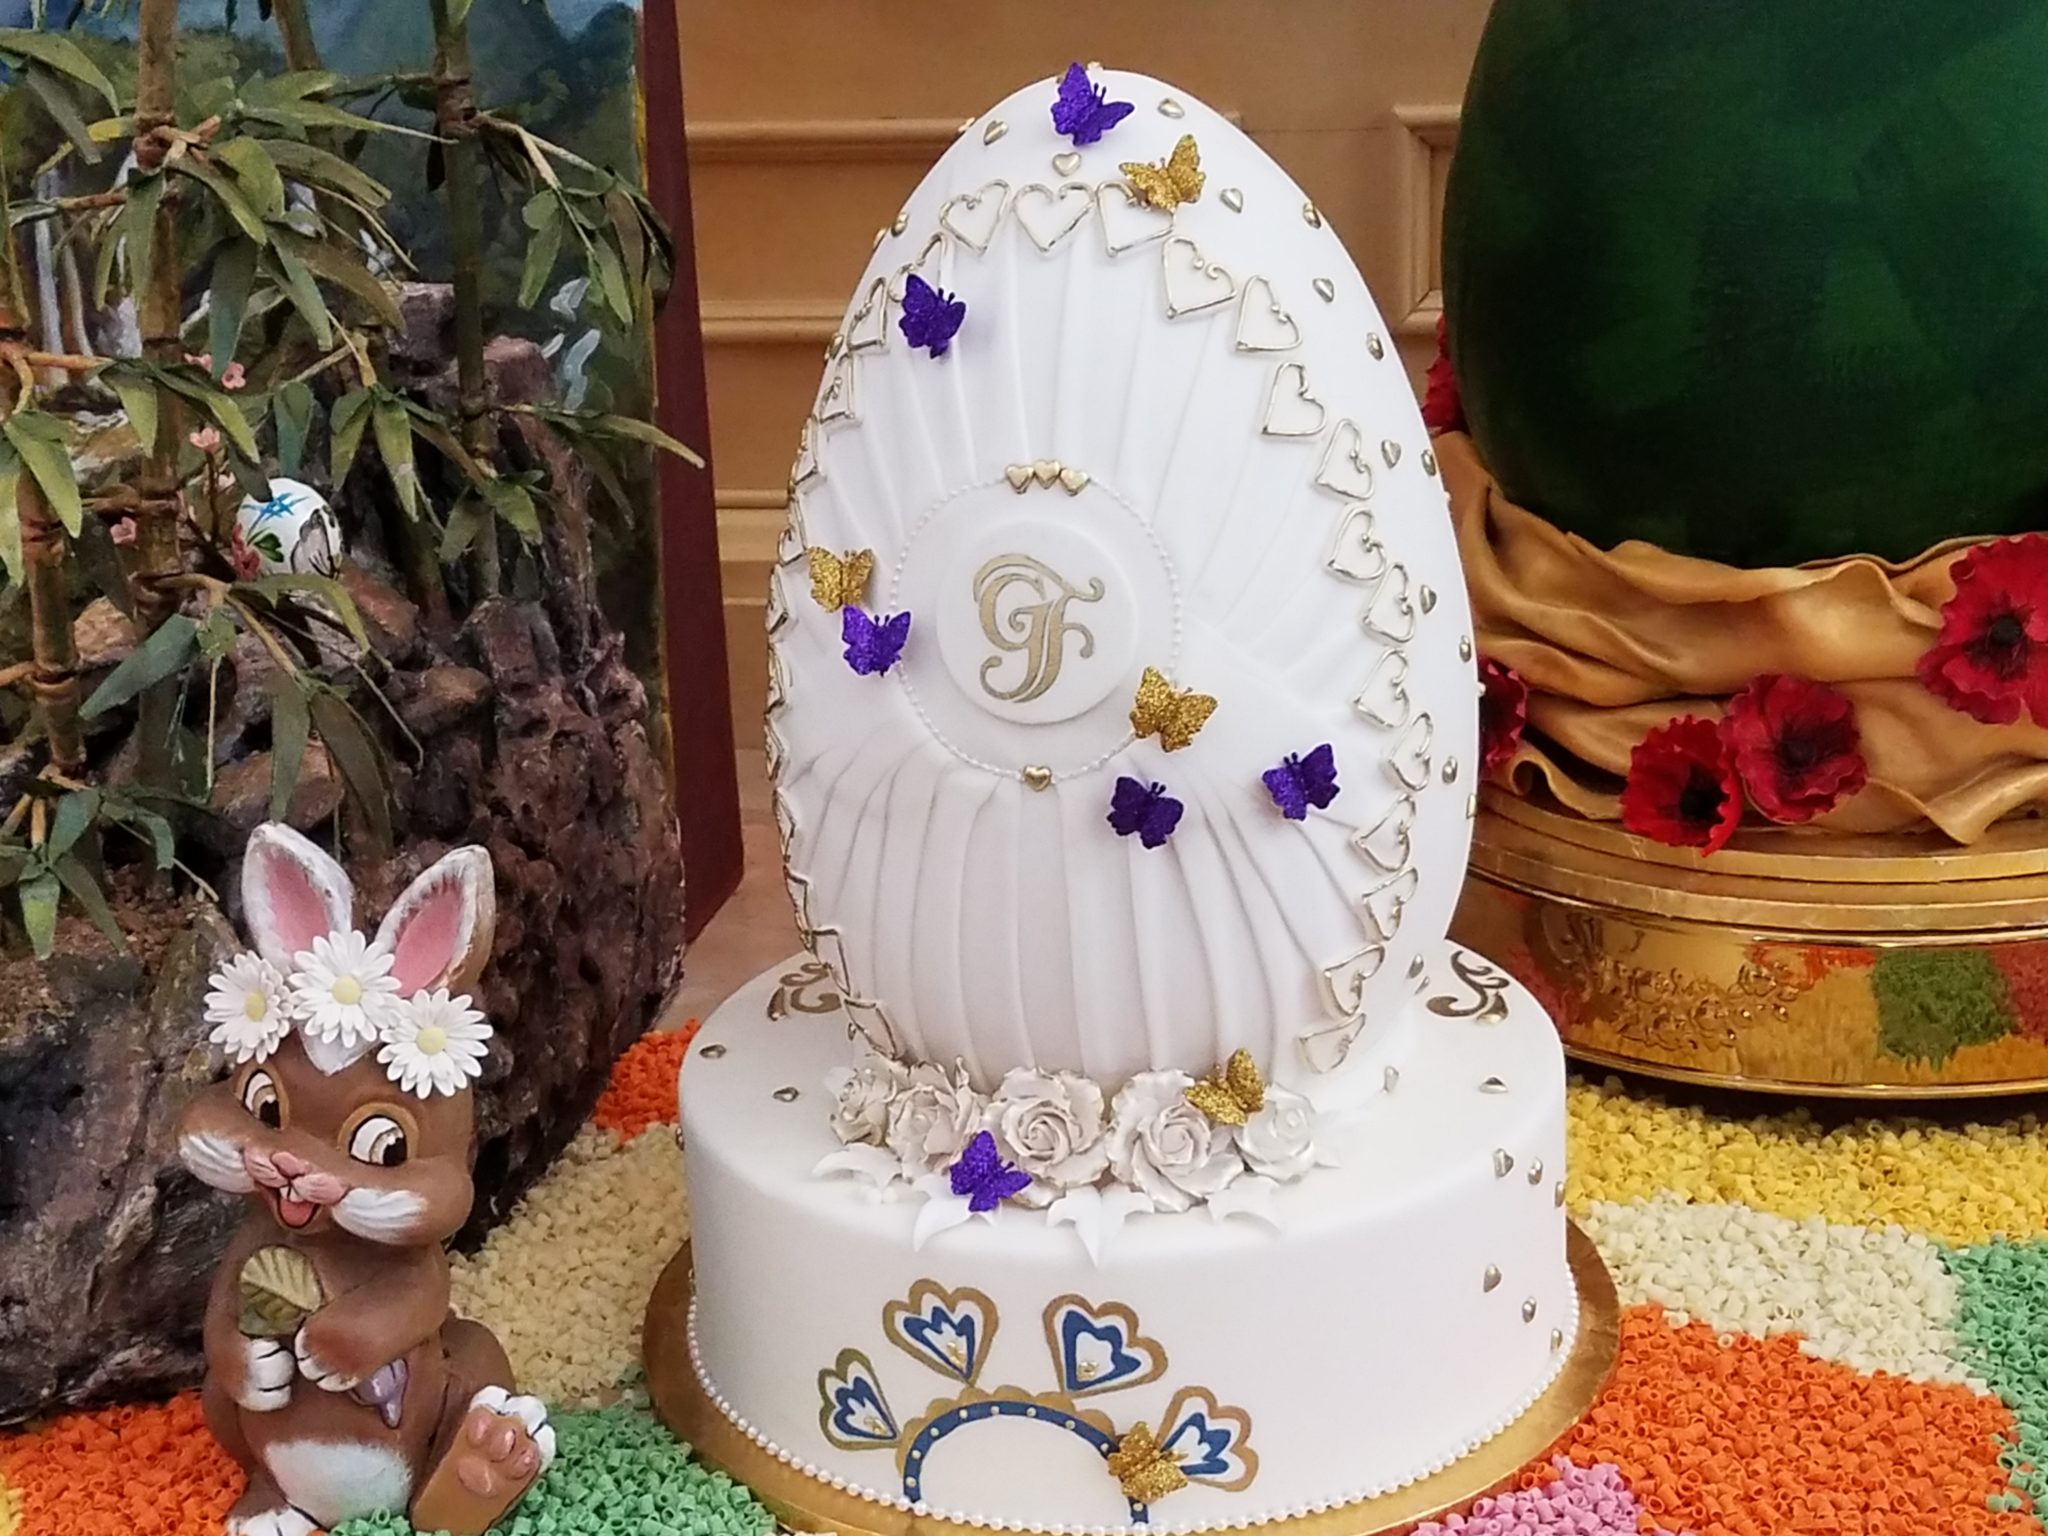 The Grand Floridian’s Sixth Annual Easter Egg Display Available For Viewing Now